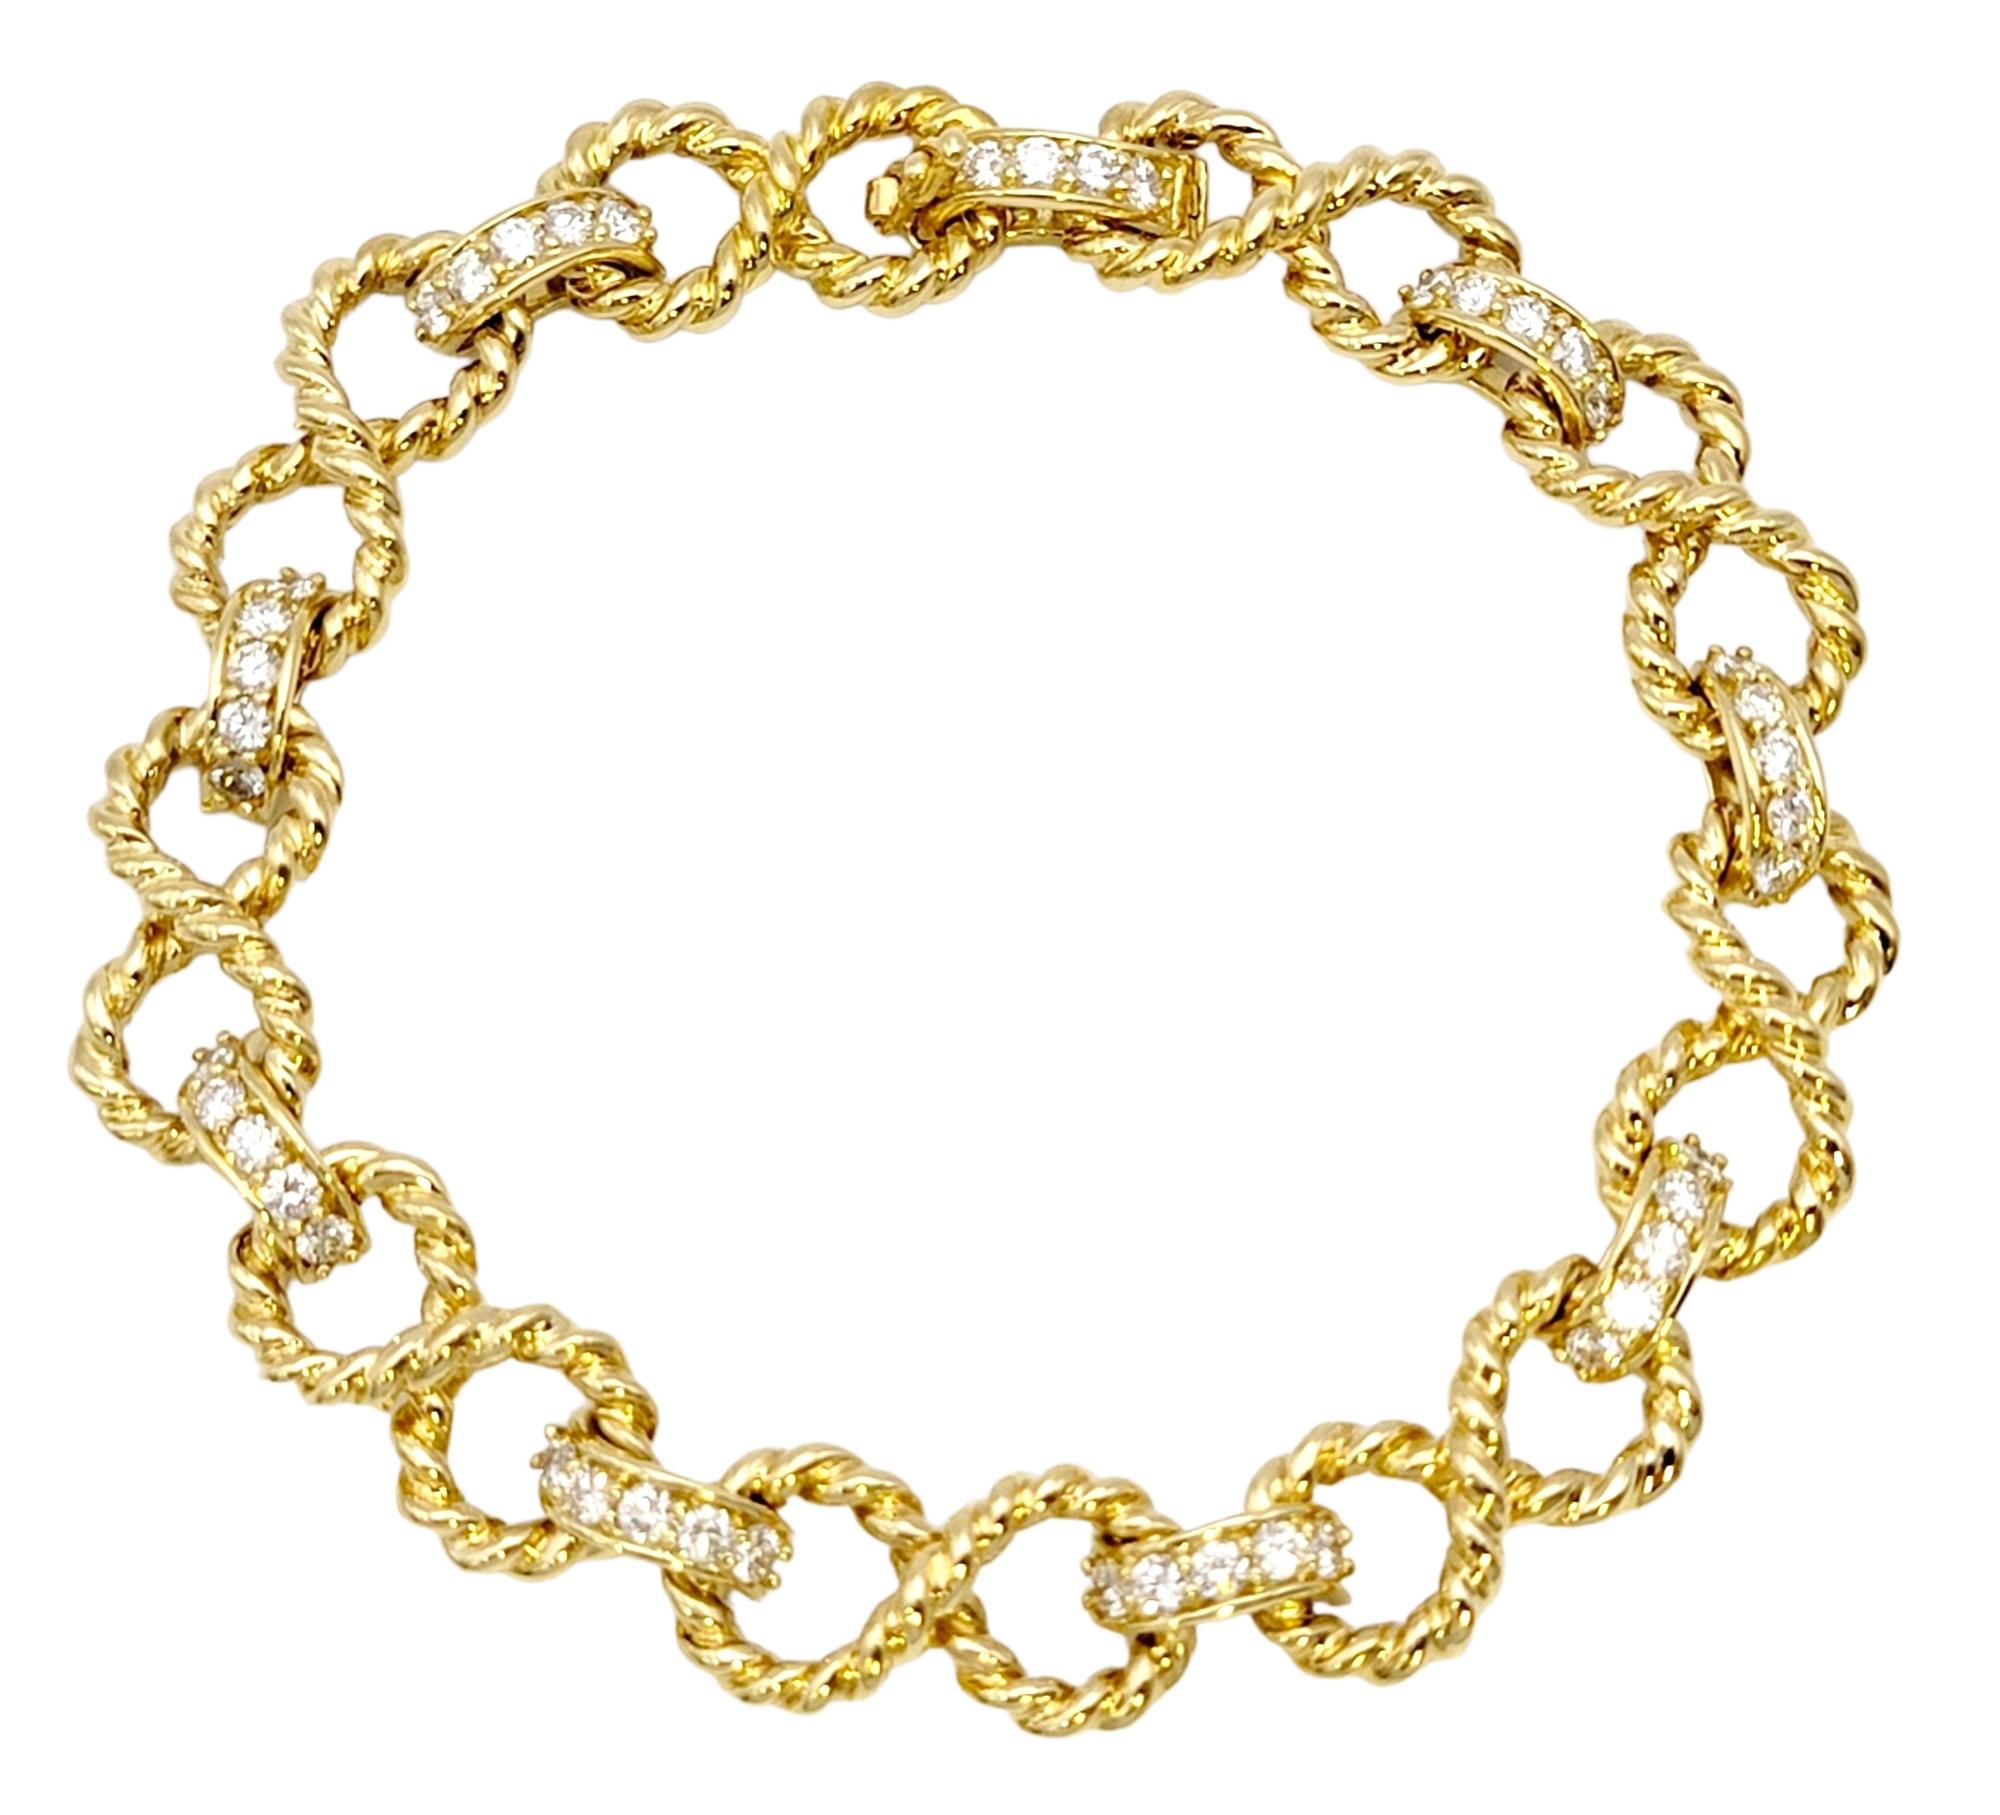 This incredible vintage Tiffany & Co. bracelet is a true embodiment of luxury and sophistication. Founded in 1837 in New York City, Tiffany & Co. is one of the world's most storied luxury design houses recognized globally for its innovative jewelry